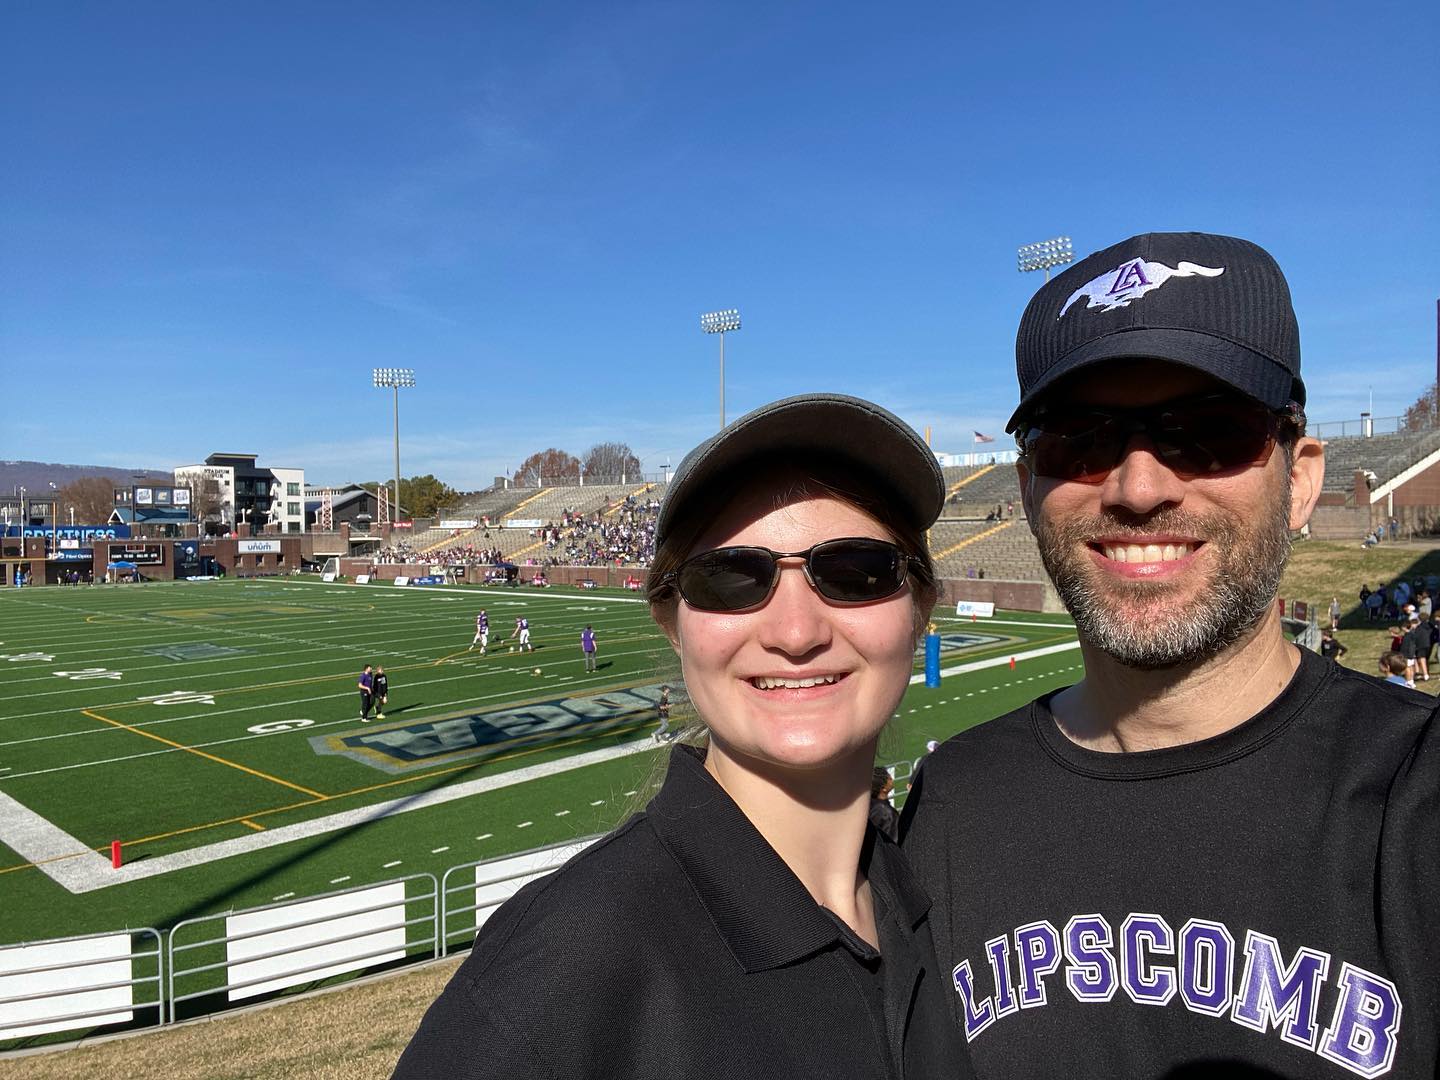 Sights and sounds from today’s State Championship game in Chattanooga. So much fun to share this day with Kate and the rest of the Lipscomb Academy Band.